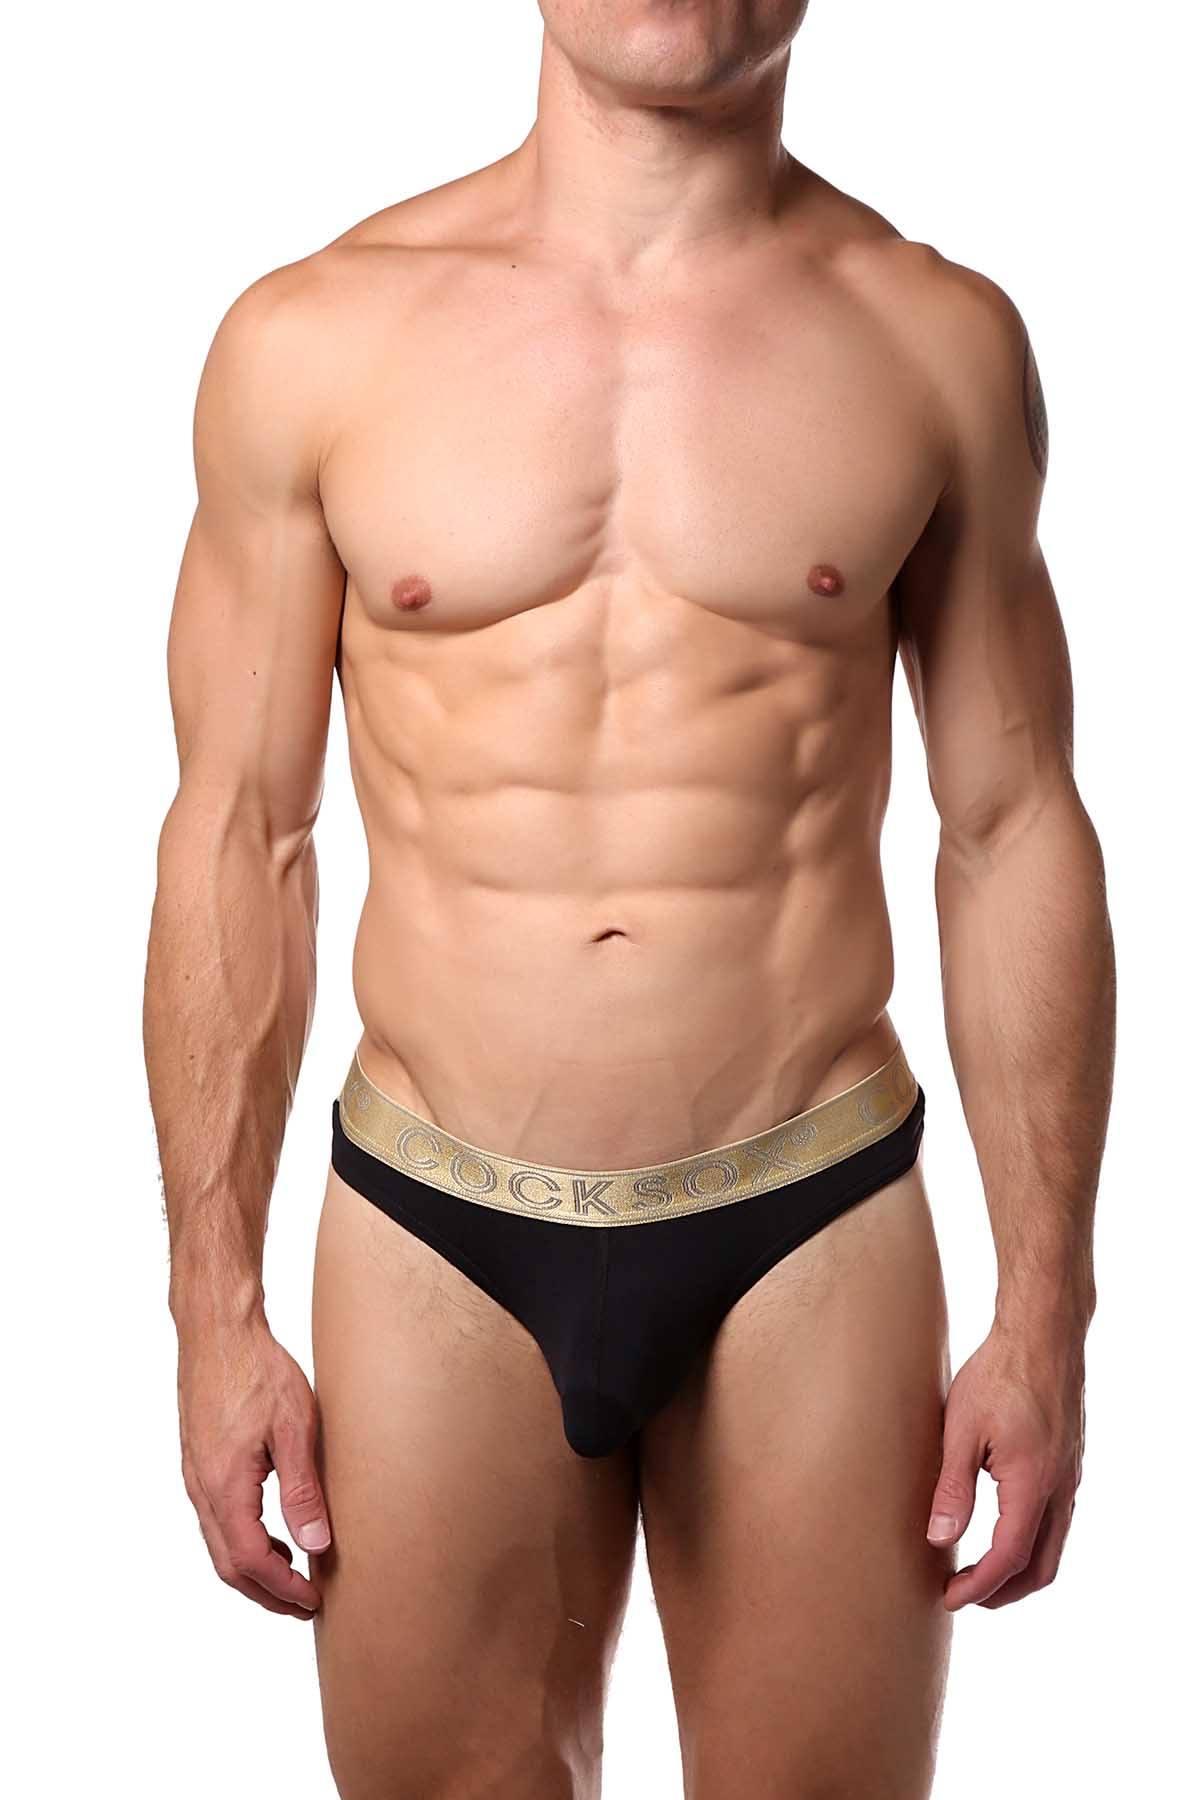 Cocksox Black/Gold-Shimmer Snug-Pouch Sports Thong